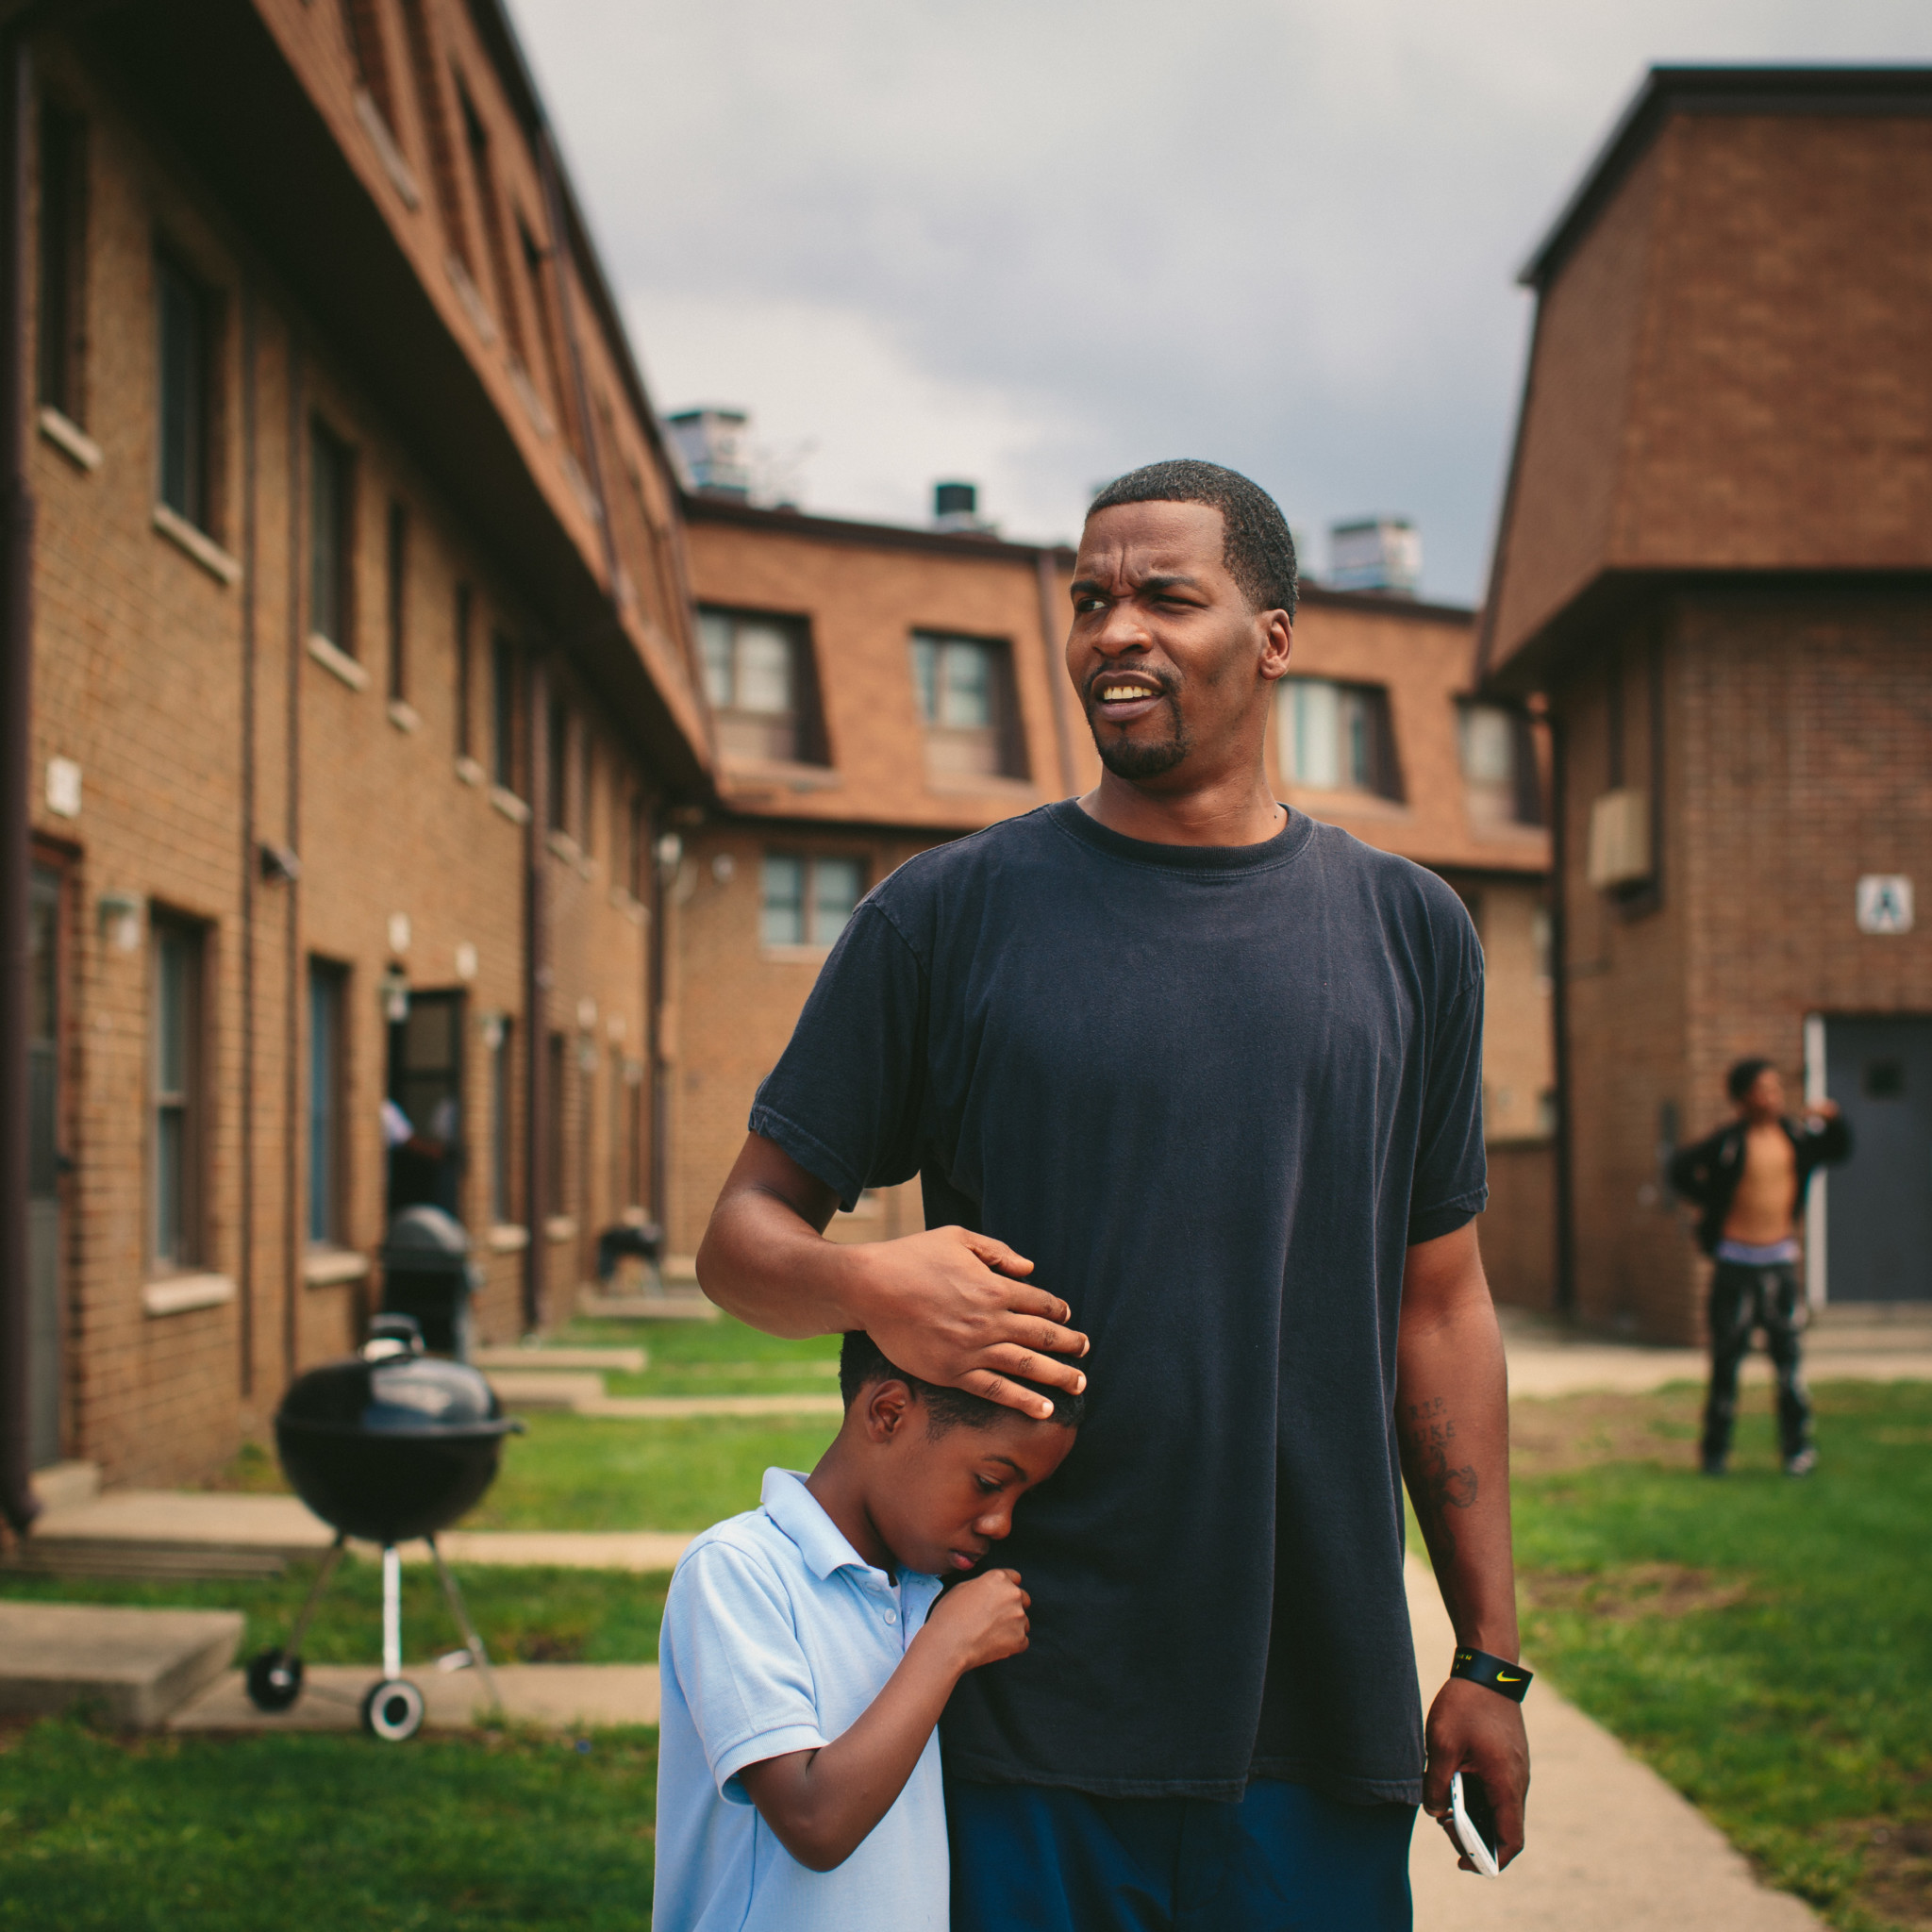 Lamont Anderson embraces his son Lamont Anderson Jr., 8, at the West Calumet Housing Complex. Anderson Jr.'s blood lead levels test results were above the CDCs 5 mg/d threshold for action. After living in the complex for more than a decade, the family moved to Gary, Indiana earlier this summer.